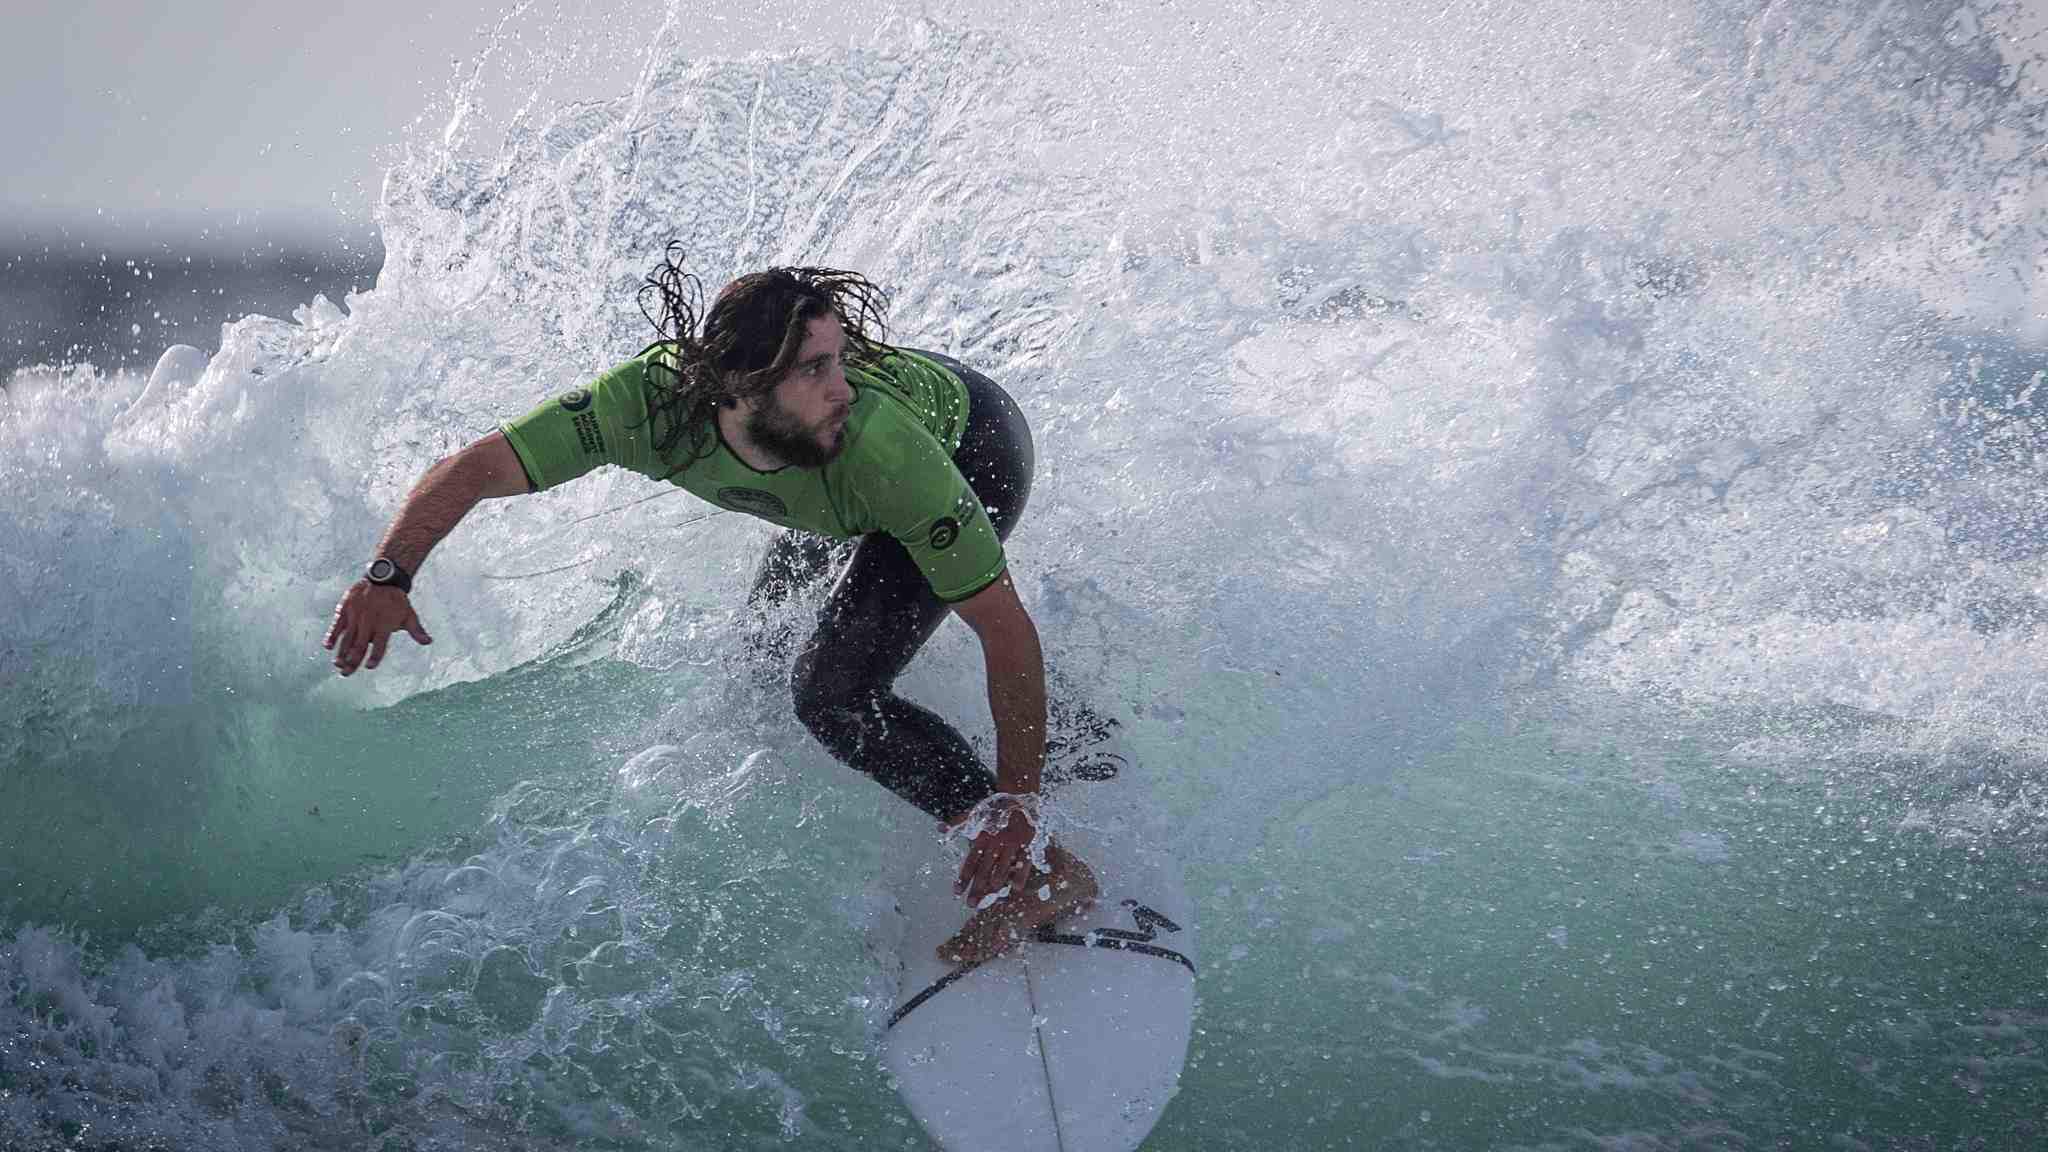 World surfing competition kicks off in the UK CGTN